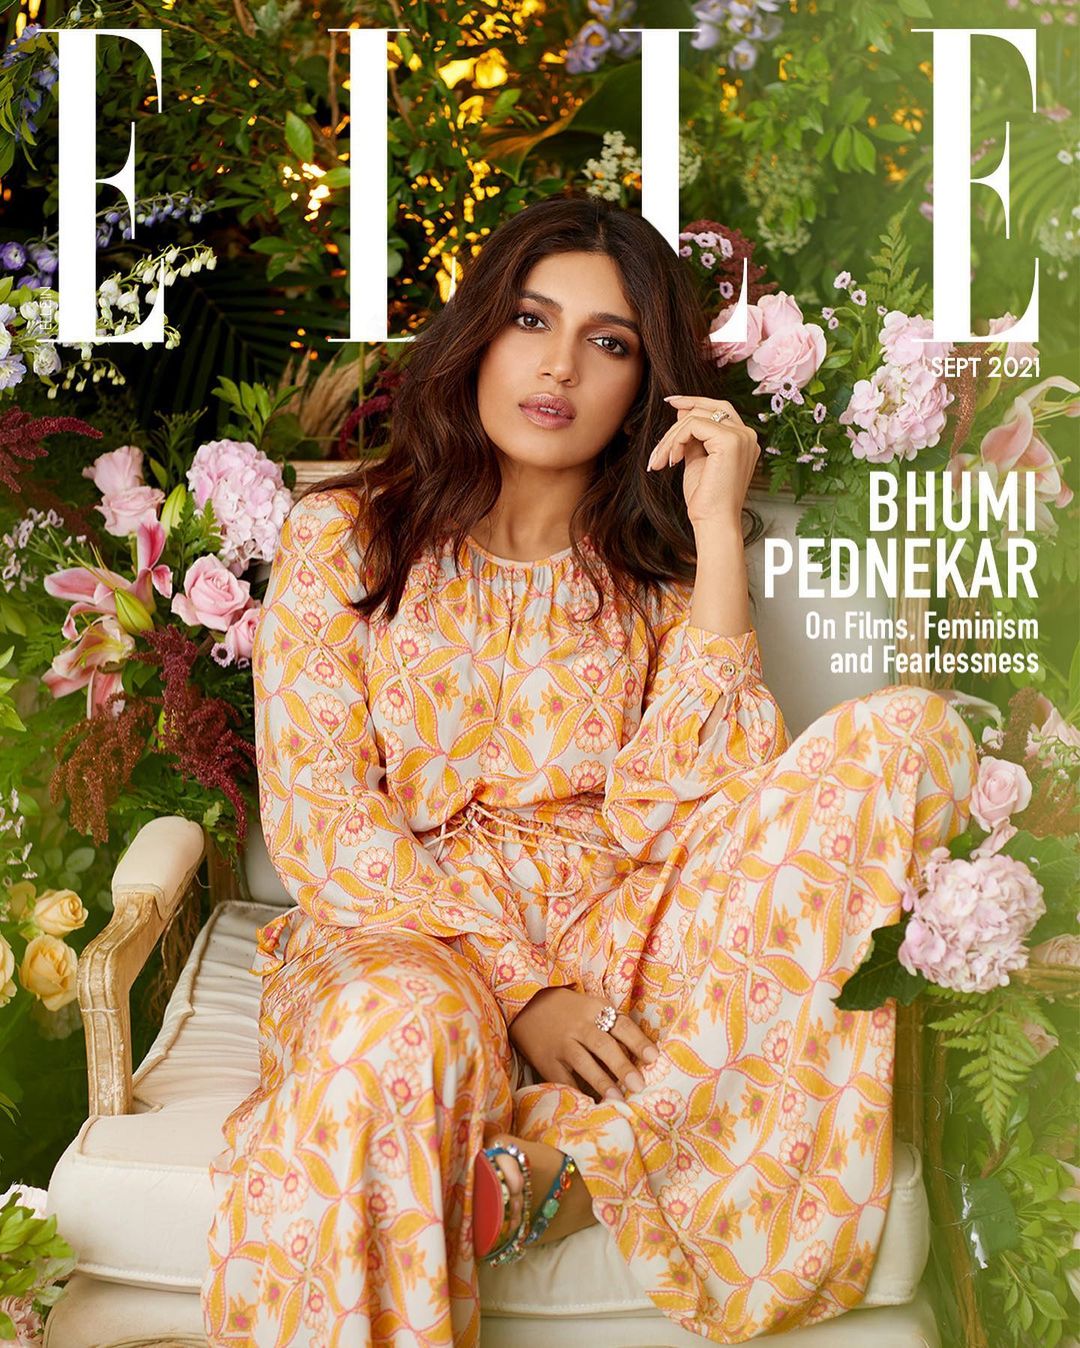 Bhumi Pednekar gives spring vibes in the floral dress.